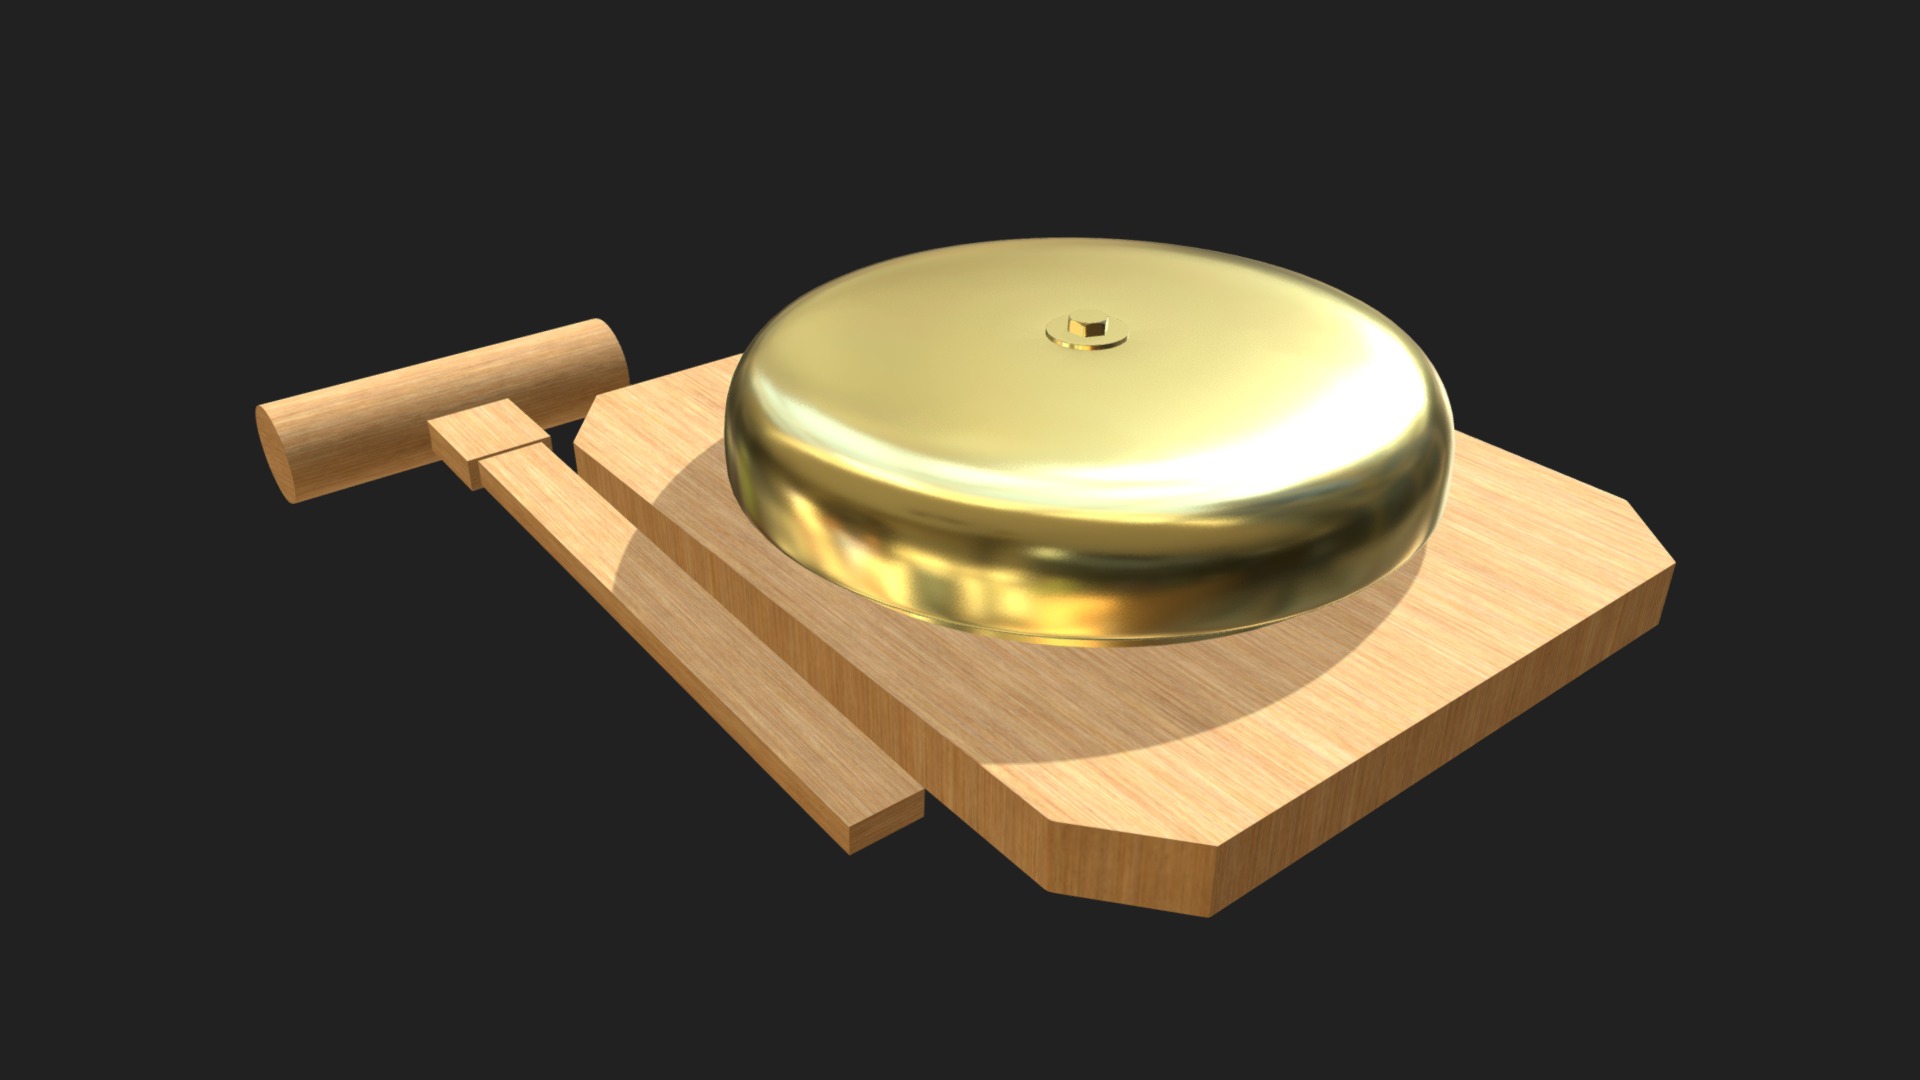 3D model Boxing bell 1 - This is a 3D model of the Boxing bell 1. The 3D model is about a wooden table with a wooden base.